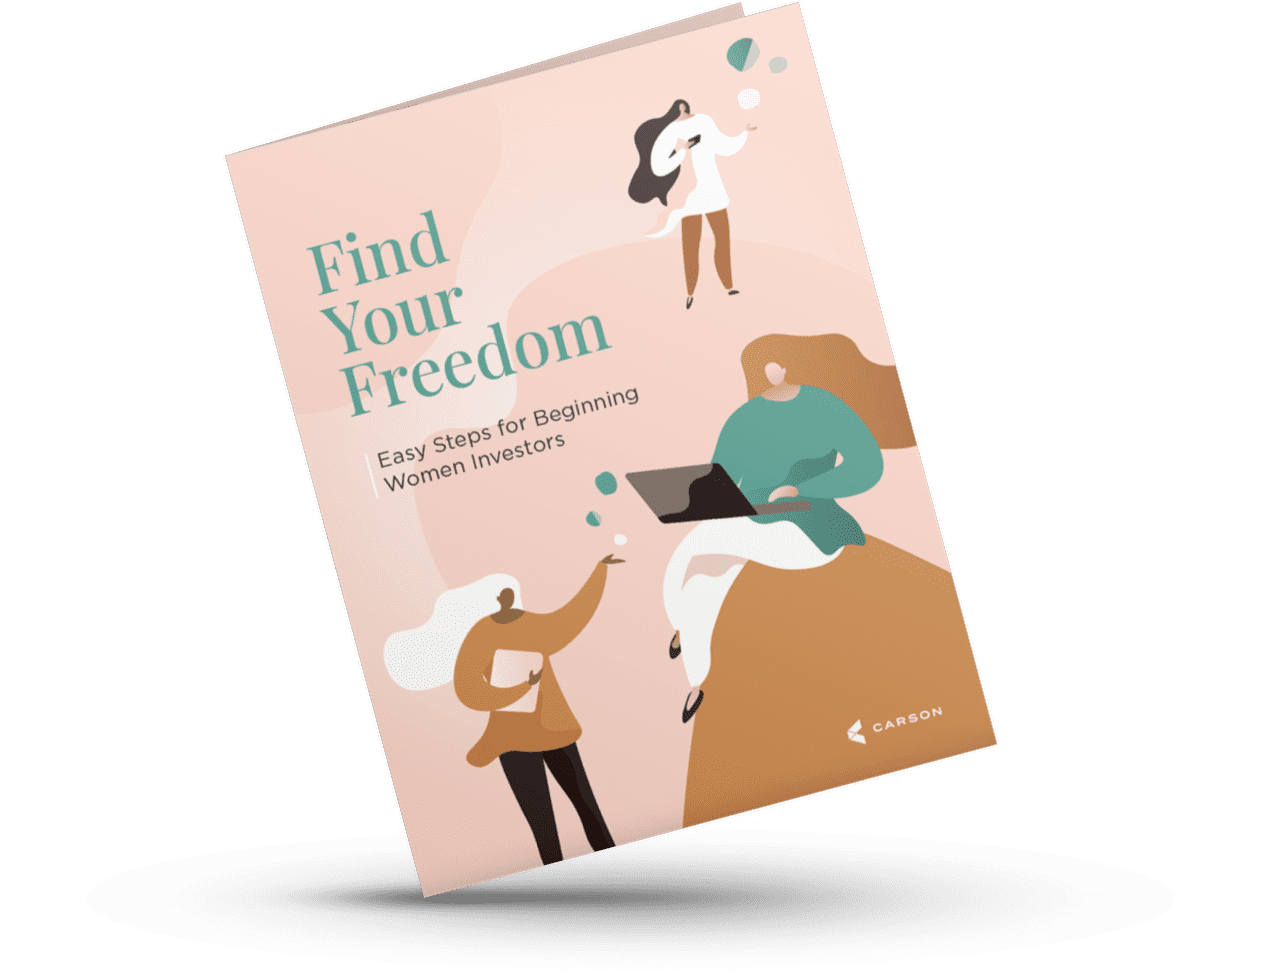 Resource - Find Your Freedom: Easy Steps for Beginning Women Investors